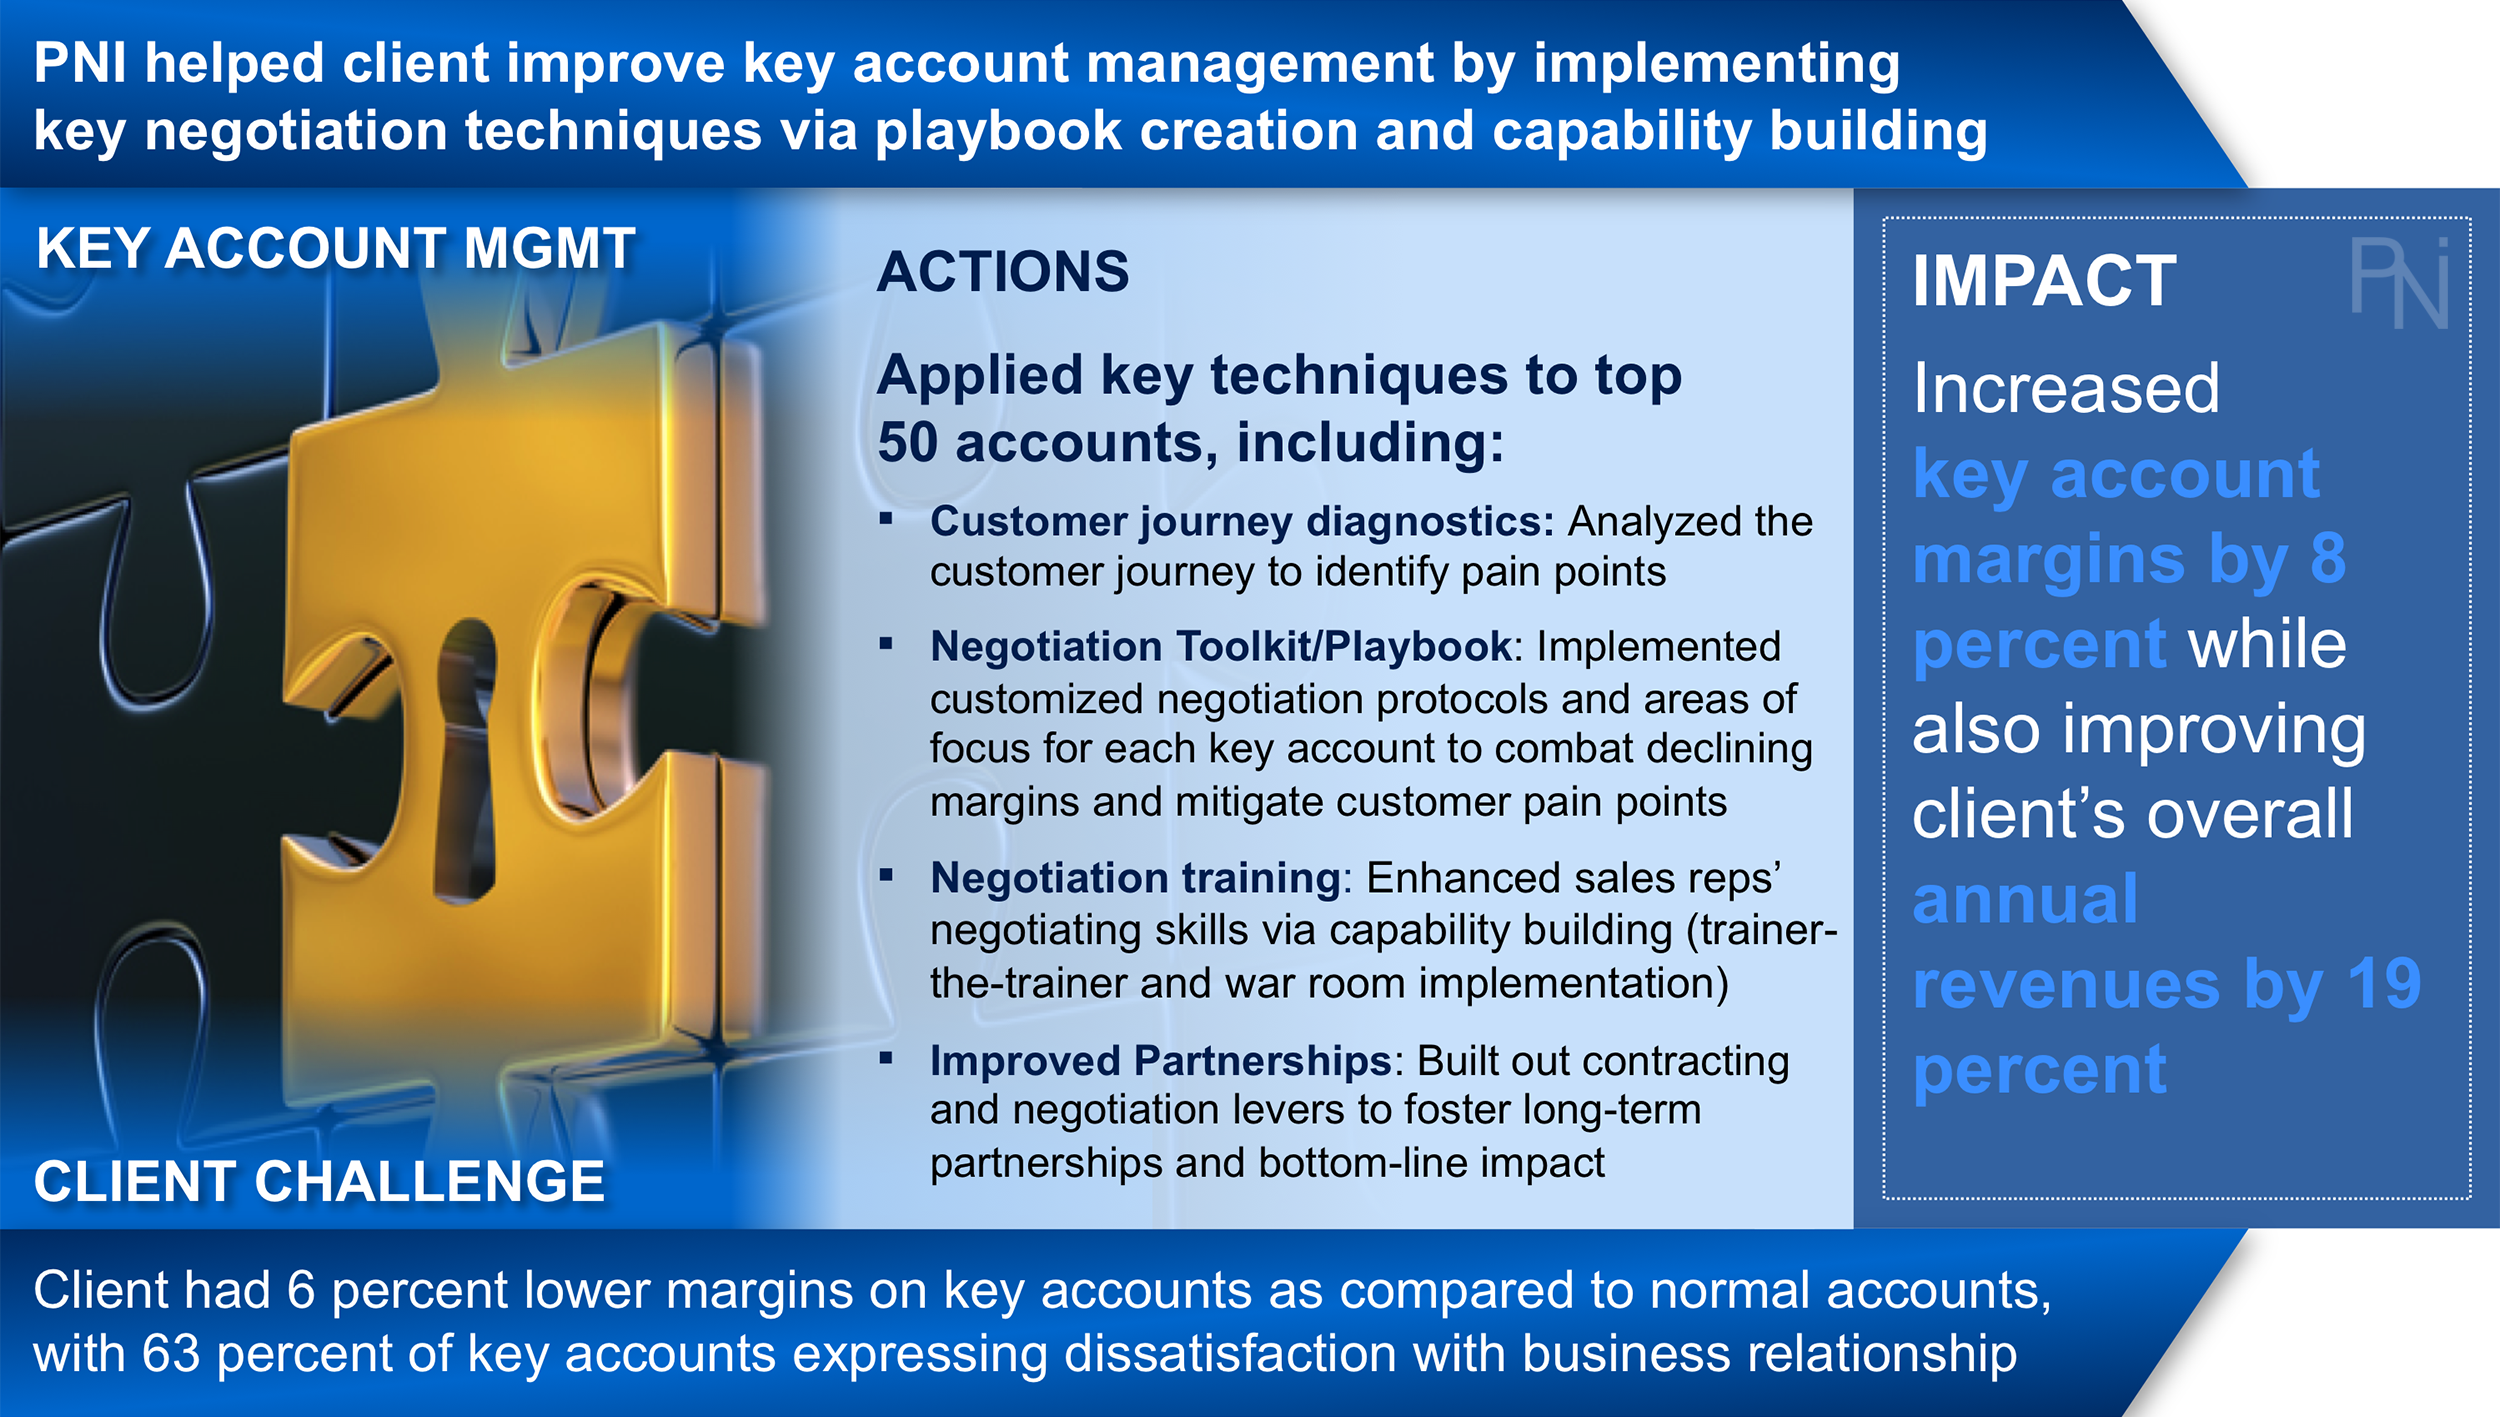 Key Account Management Results 1 - PNI.png